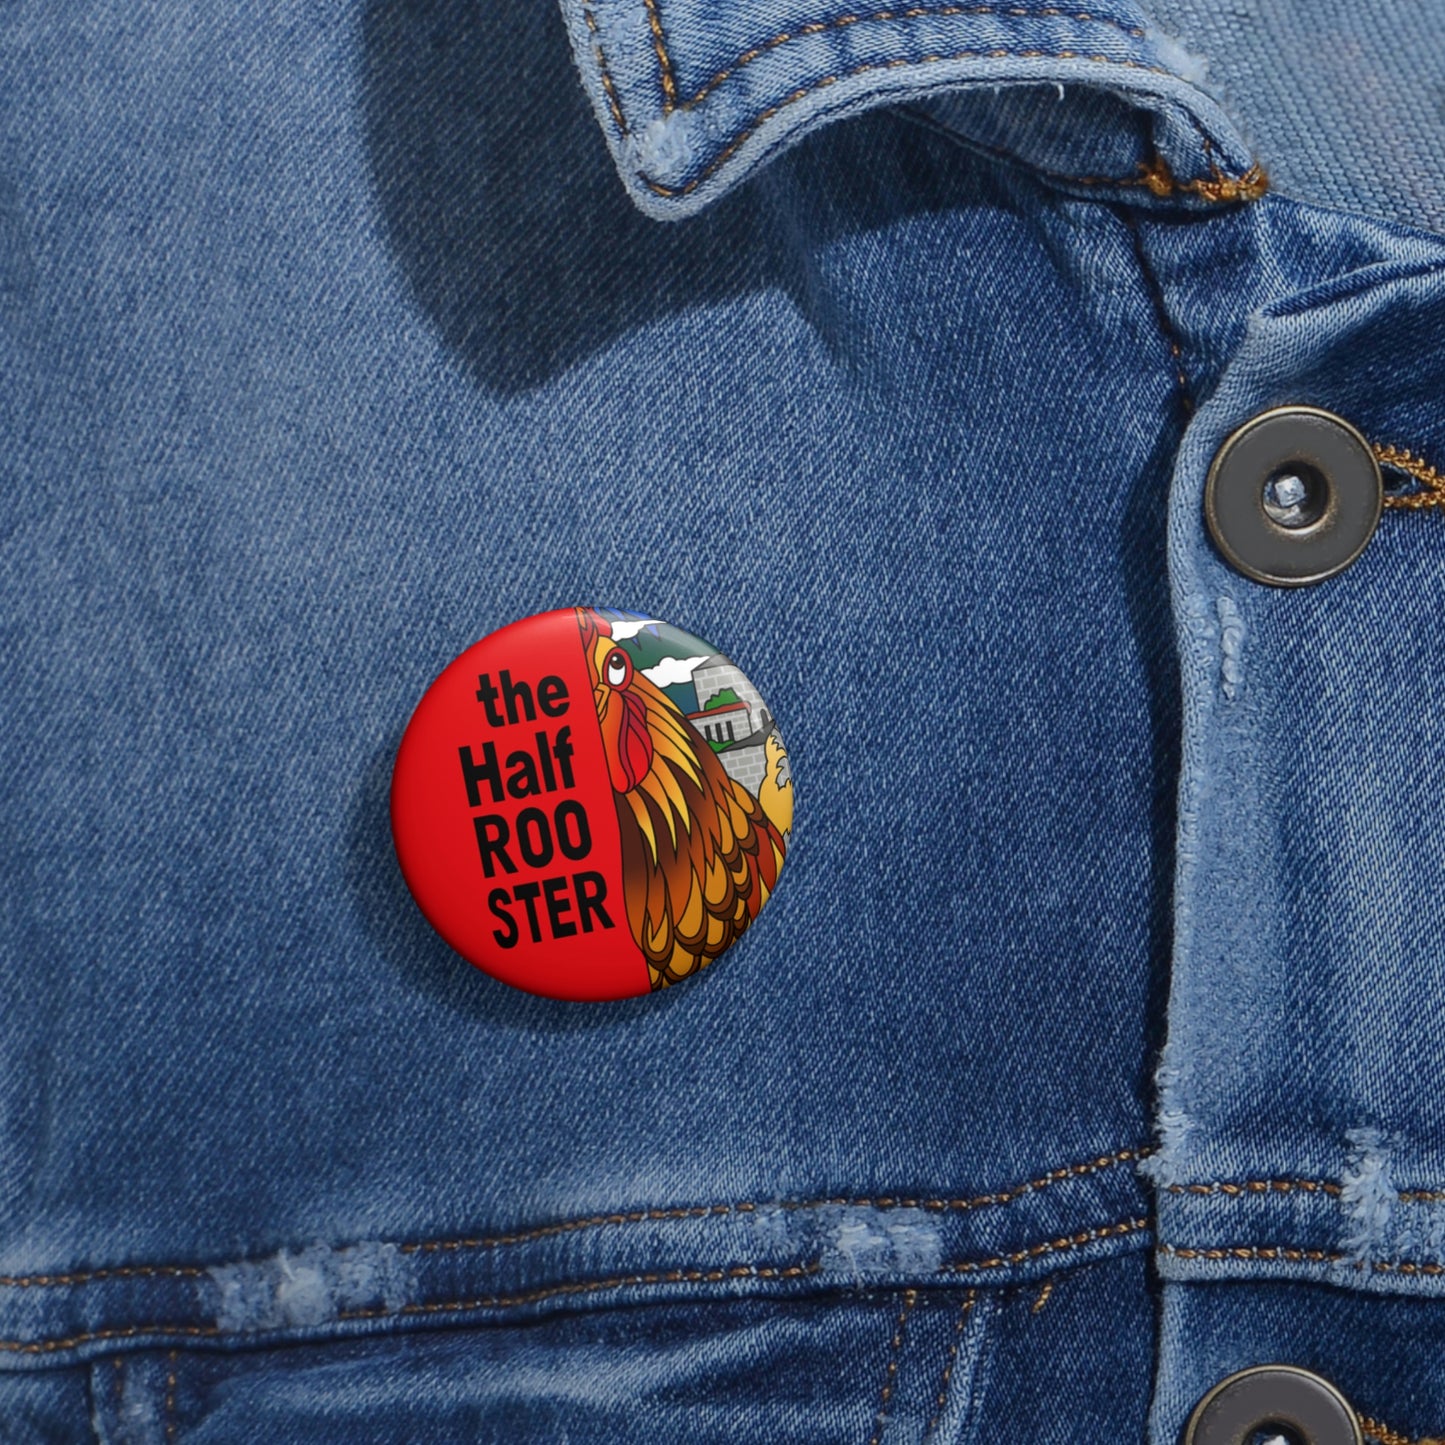 The Half Rooster Custom Pin Buttons